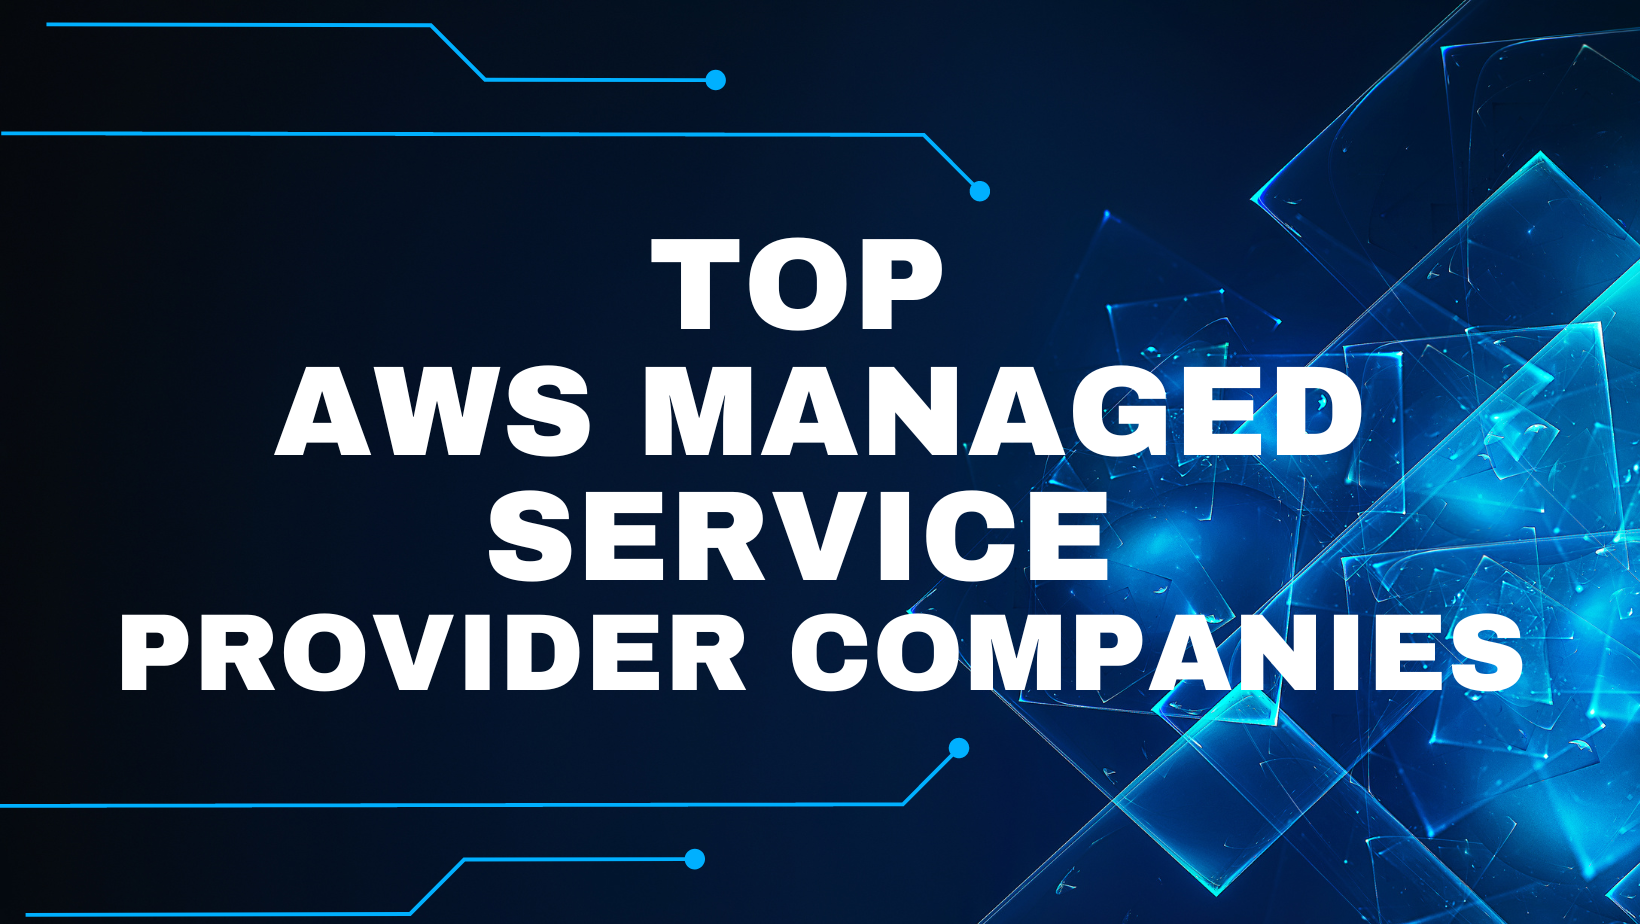 AWS Managed Service Provider Companies - Top 10